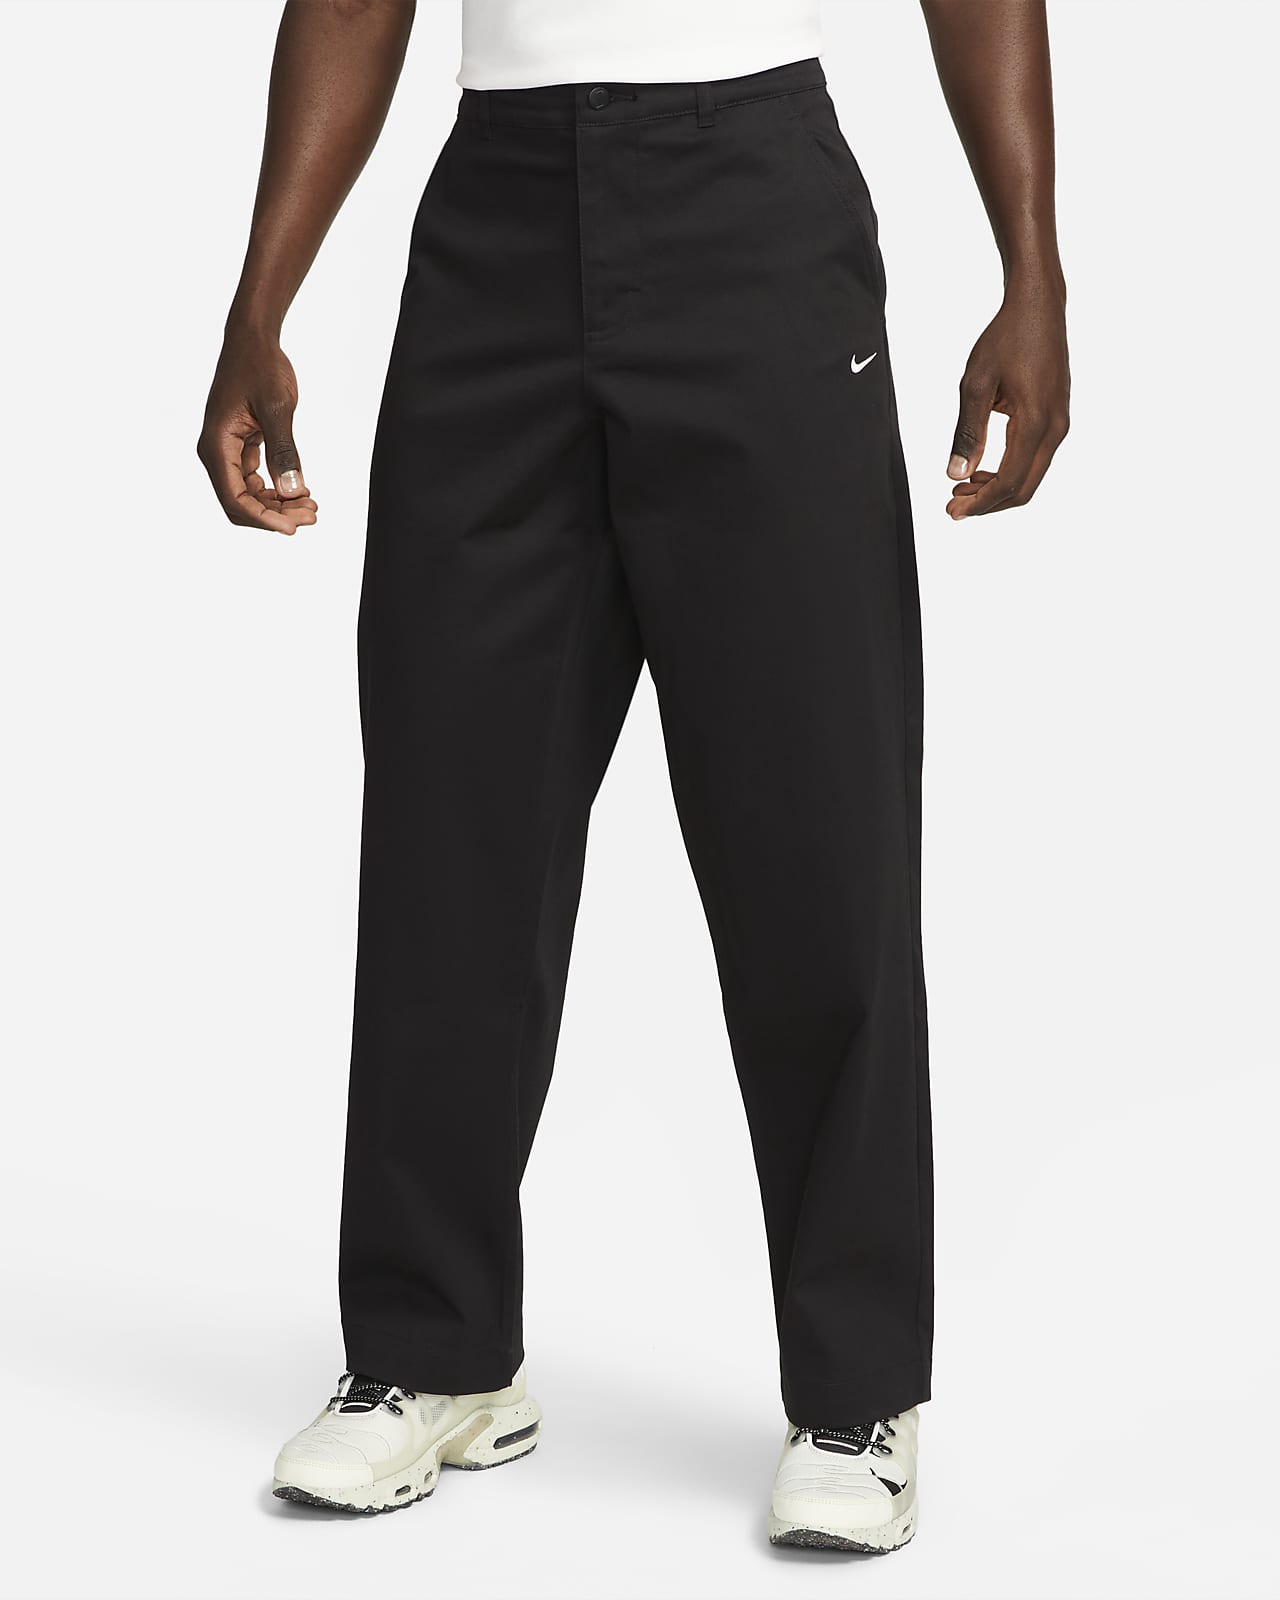 Nike Life Men's Unlined Cotton Chino Trousers